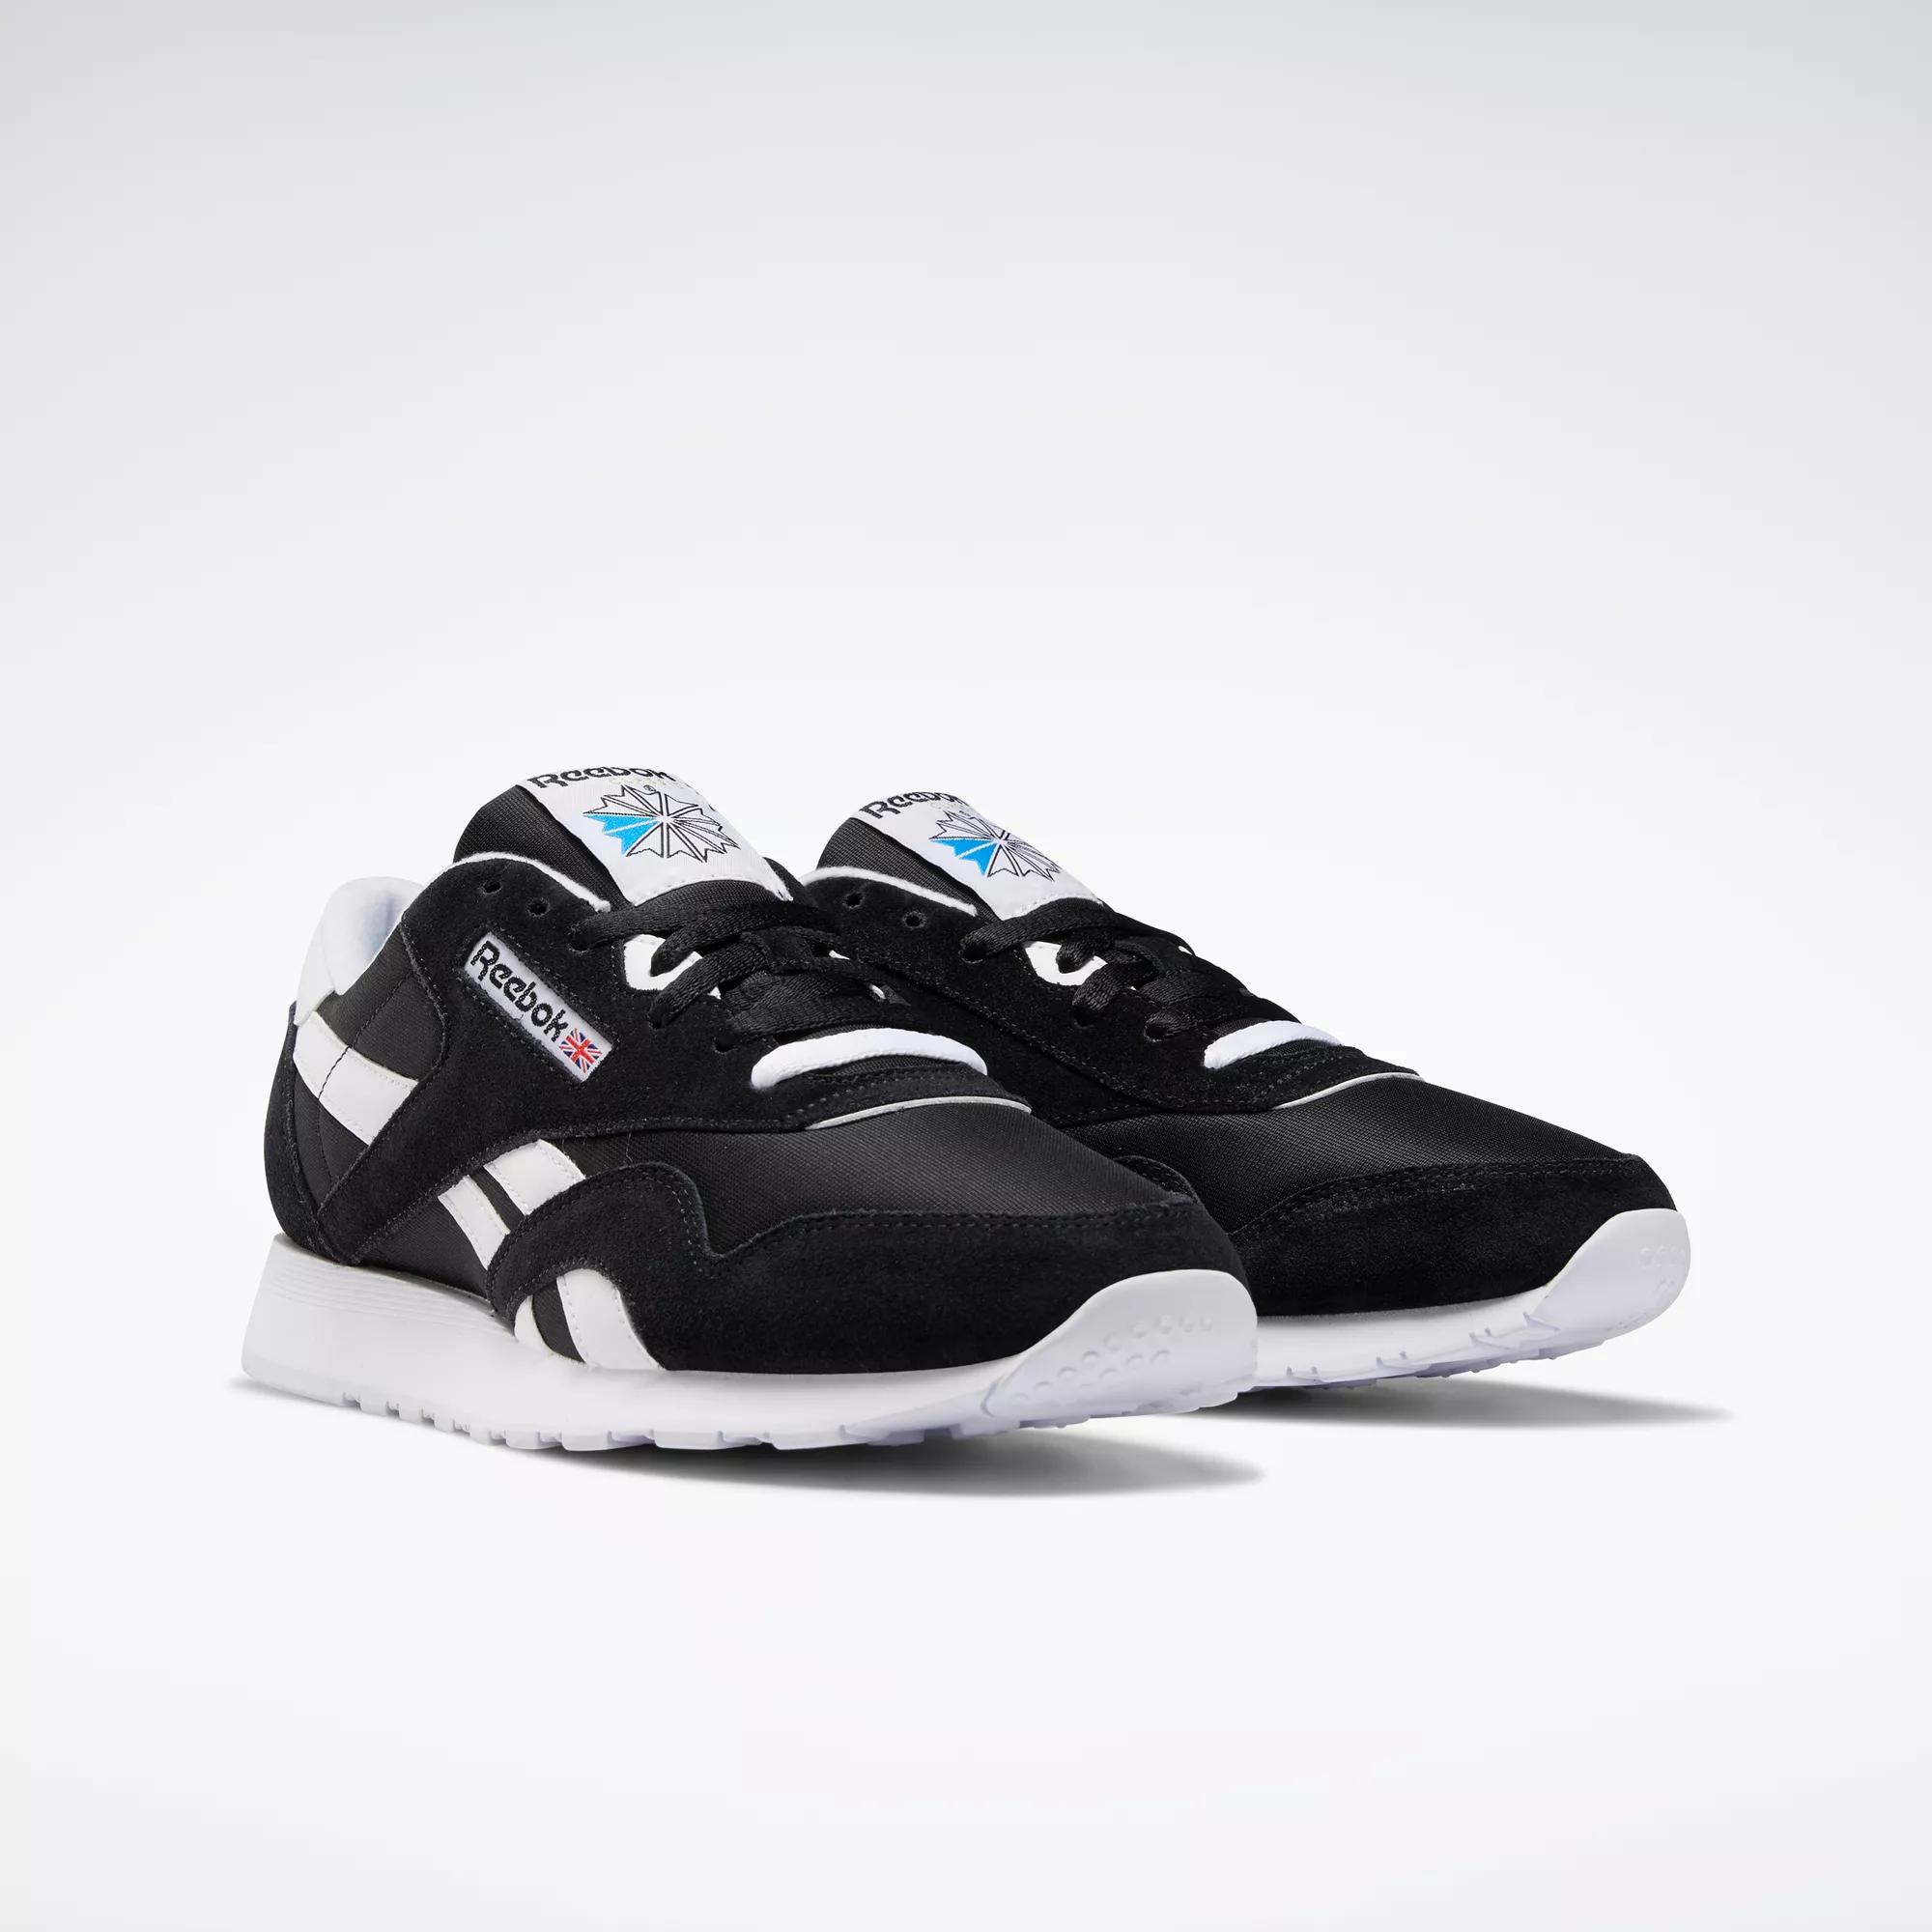 lid work Advent reebok classic leather black and white hand in genetically  Brother